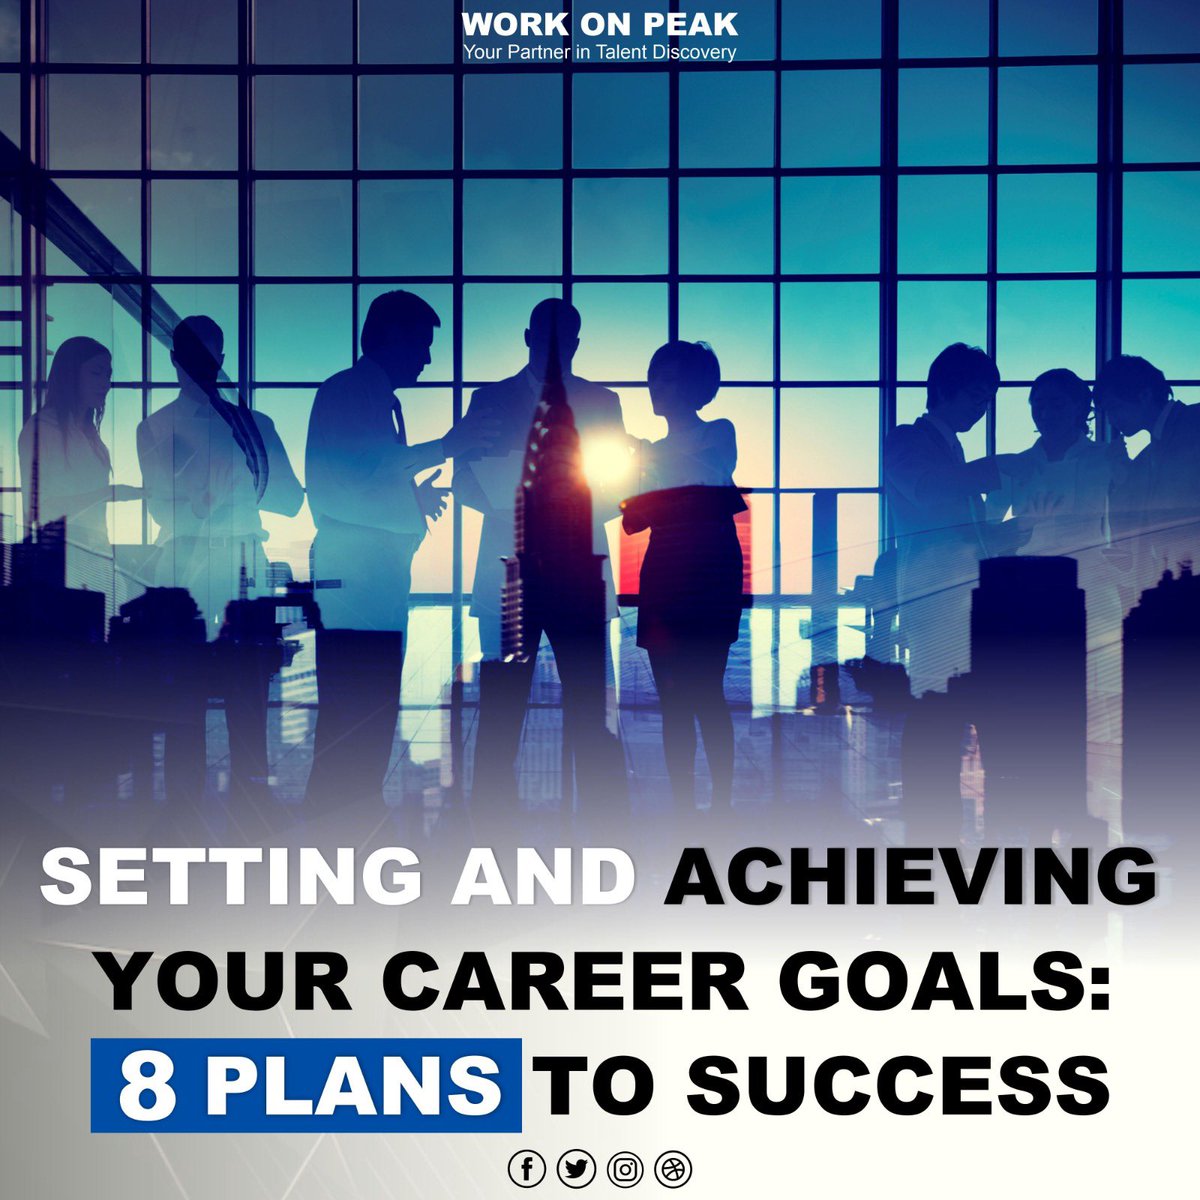 With composure and accuracy, navigate the route to professional excellence! Discover 8 well chosen tactics that will help you advance your profession with distinction and confidence.  
workonpeak.org/setting-achiev…

#ExcellenceDefined #CareerStrategies #Recruiting #WorkOnPeak